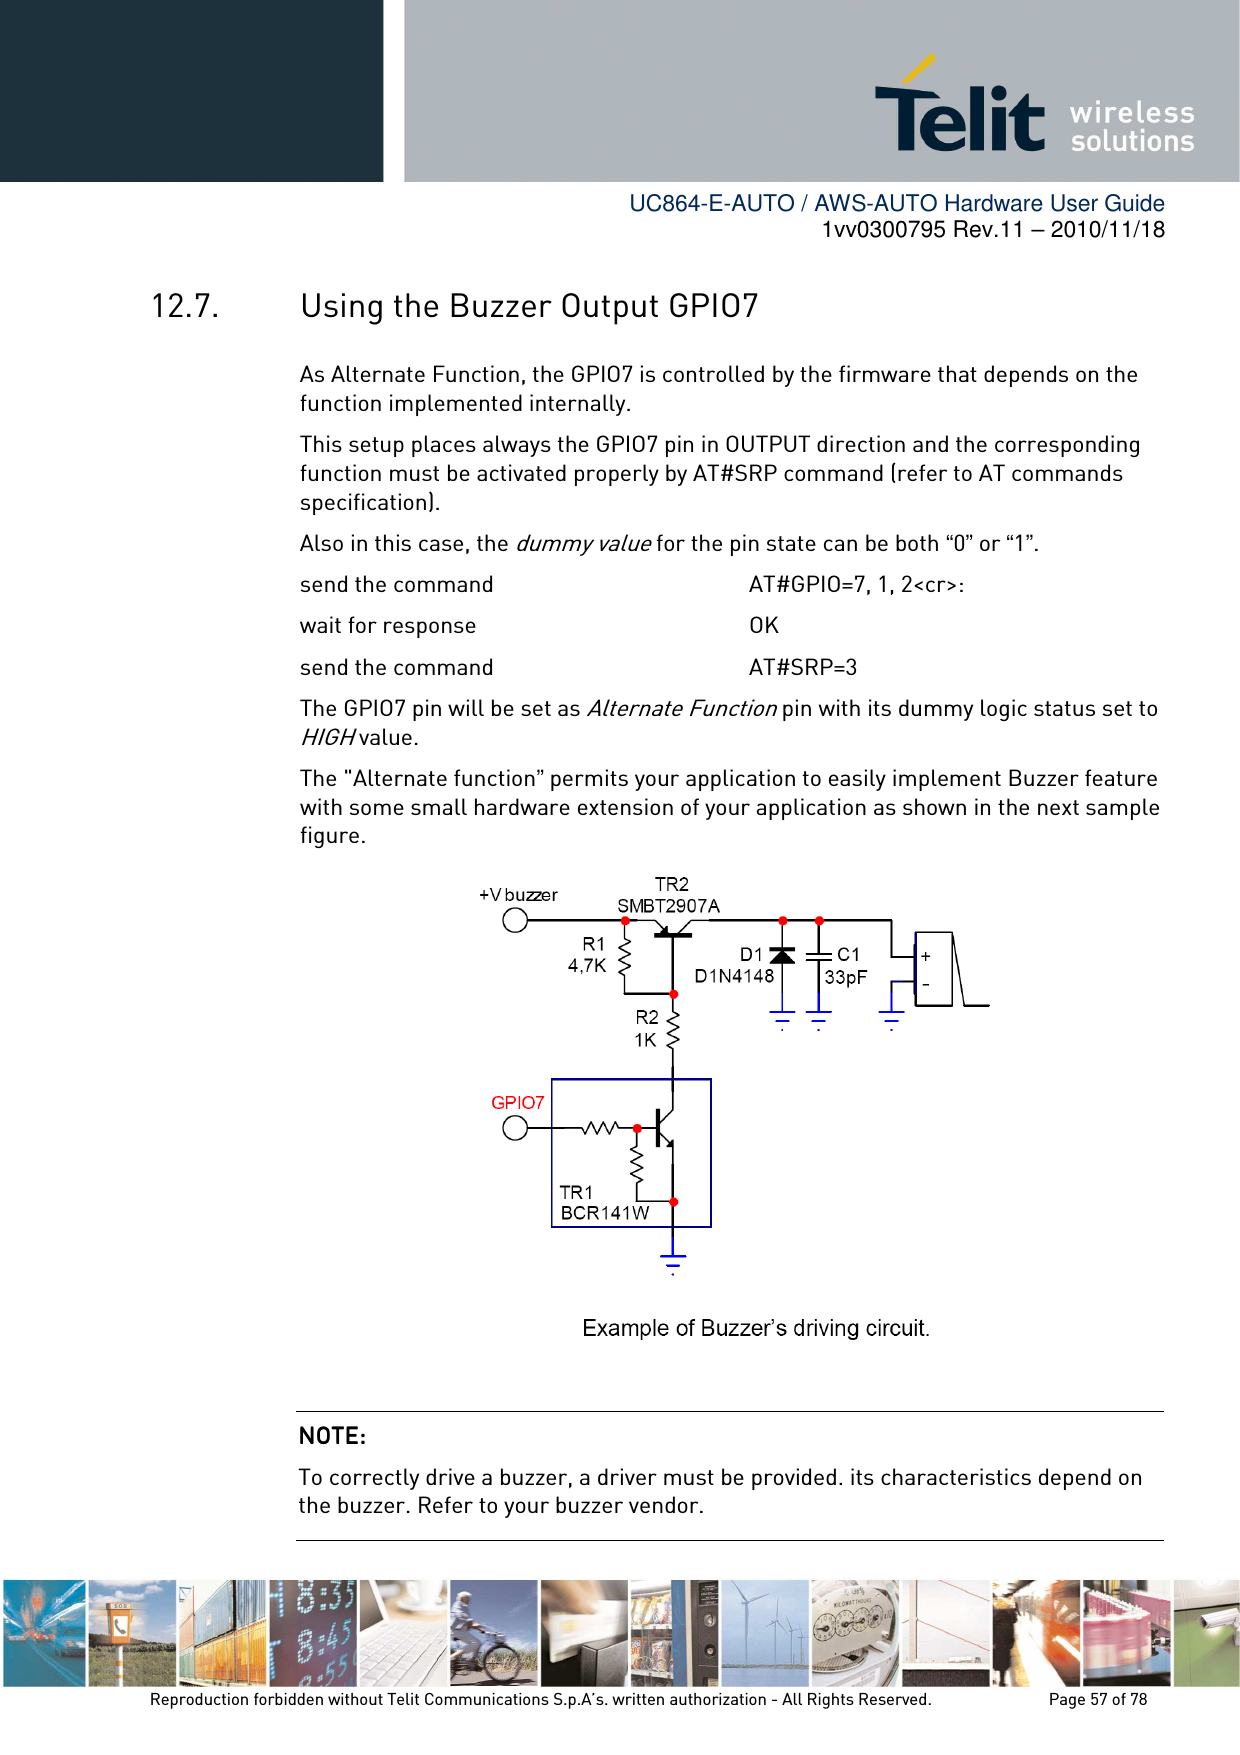        UC864-E-AUTO / AWS-AUTO Hardware User Guide 1vv0300795 Rev.11 – 2010/11/18     Reproduction forbidden without Telit Communications S.p.A’s. written authorization - All Rights Reserved.    Page 57 of 78  12.7. Using the Buzzer Output GPIO7 As Alternate Function, the GPIO7 is controlled by the firmware that depends on the function implemented internally. This setup places always the GPIO7 pin in OUTPUT direction and the corresponding function must be activated properly by AT#SRP command (refer to AT commands specification). Also in this case, the dummy value for the pin state can be both “0” or “1”. send the command         AT#GPIO=7, 1, 2&lt;cr&gt;: wait for response         OK send the command        AT#SRP=3 The GPIO7 pin will be set as Alternate Function pin with its dummy logic status set to HIGH value. The &quot;Alternate function” permits your application to easily implement Buzzer feature with some small hardware extension of your application as shown in the next sample figure.  NOTE: NOTE: NOTE: NOTE:     To correctly drive a buzzer, a driver must be provided. its characteristics depend on the buzzer. Refer to your buzzer vendor. 